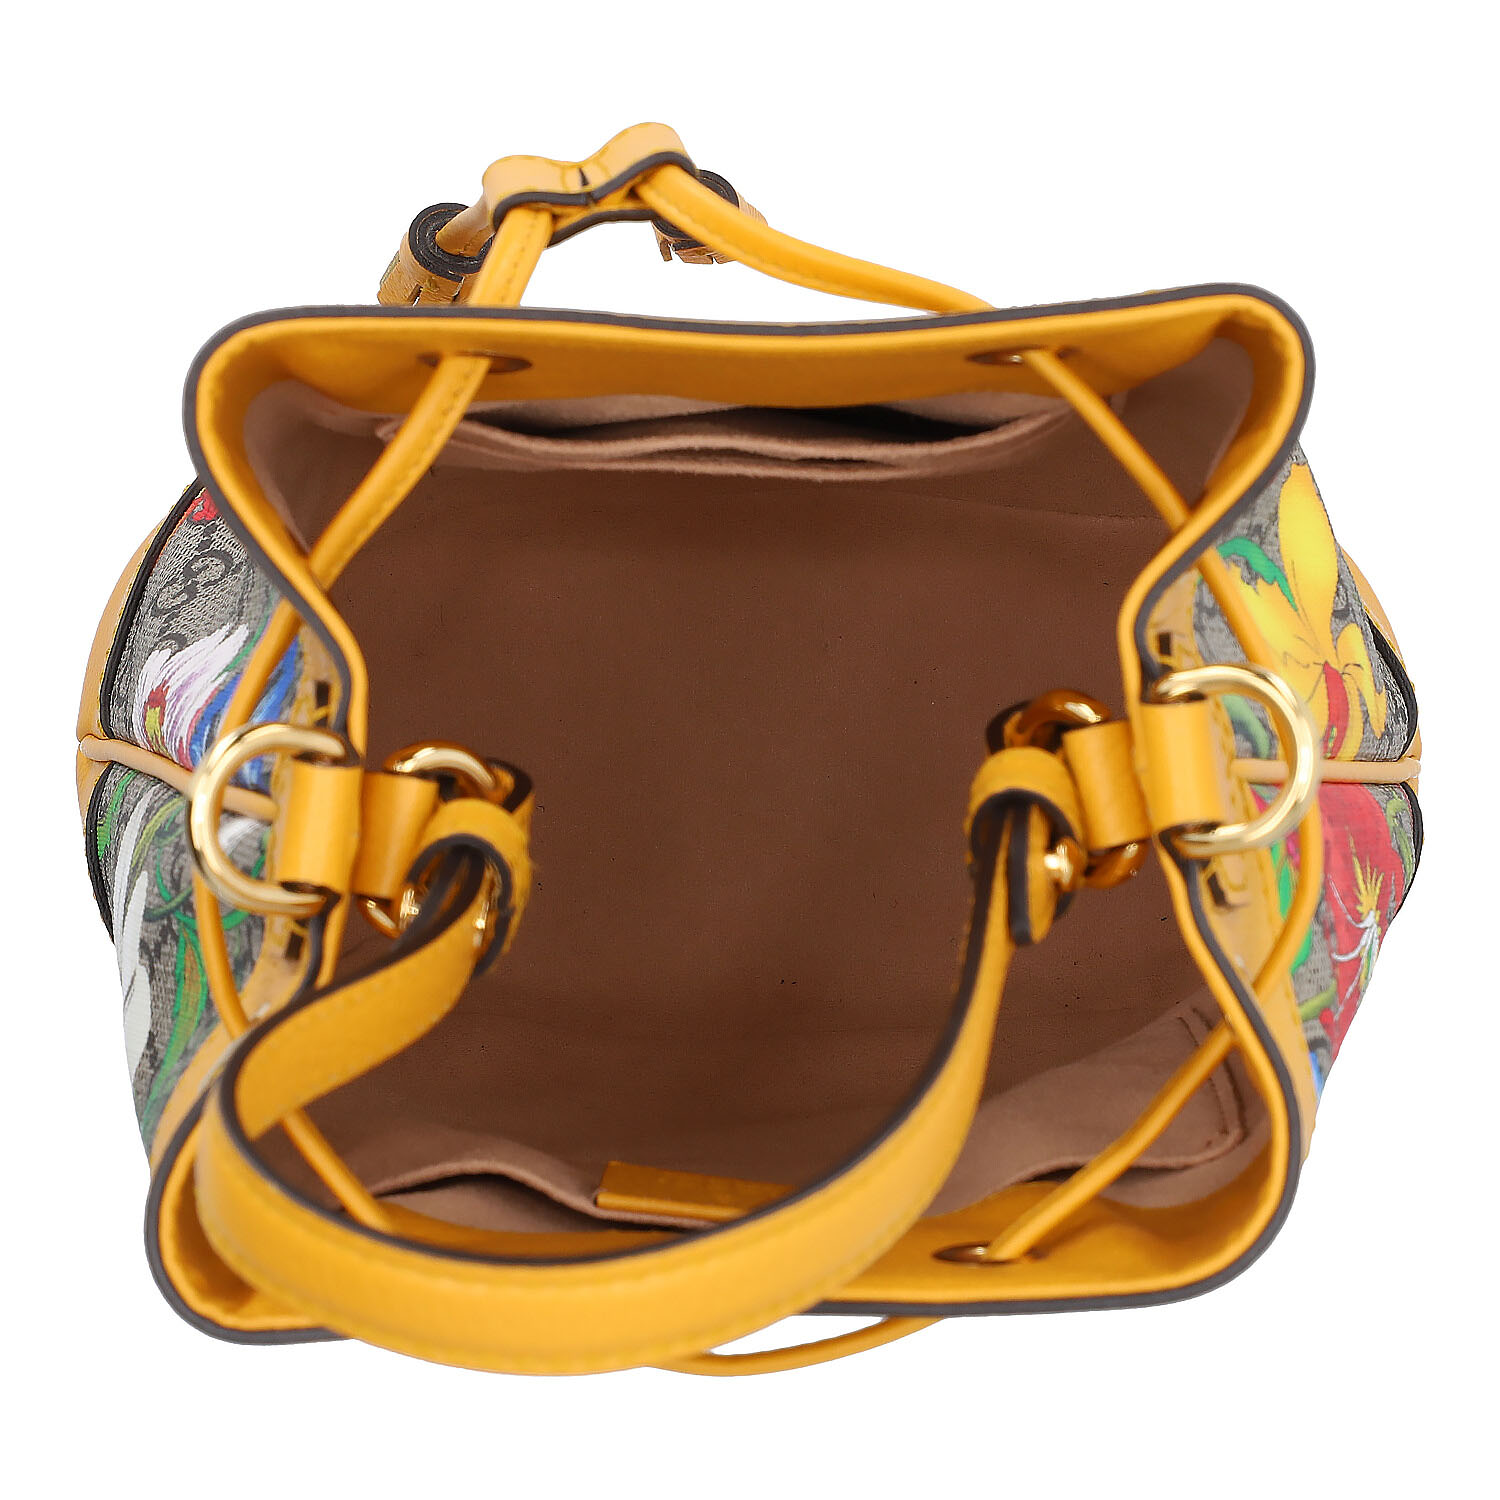 GUCCI Beuteltasche "OPHIDIA BUCKET BAG". - Image 6 of 8